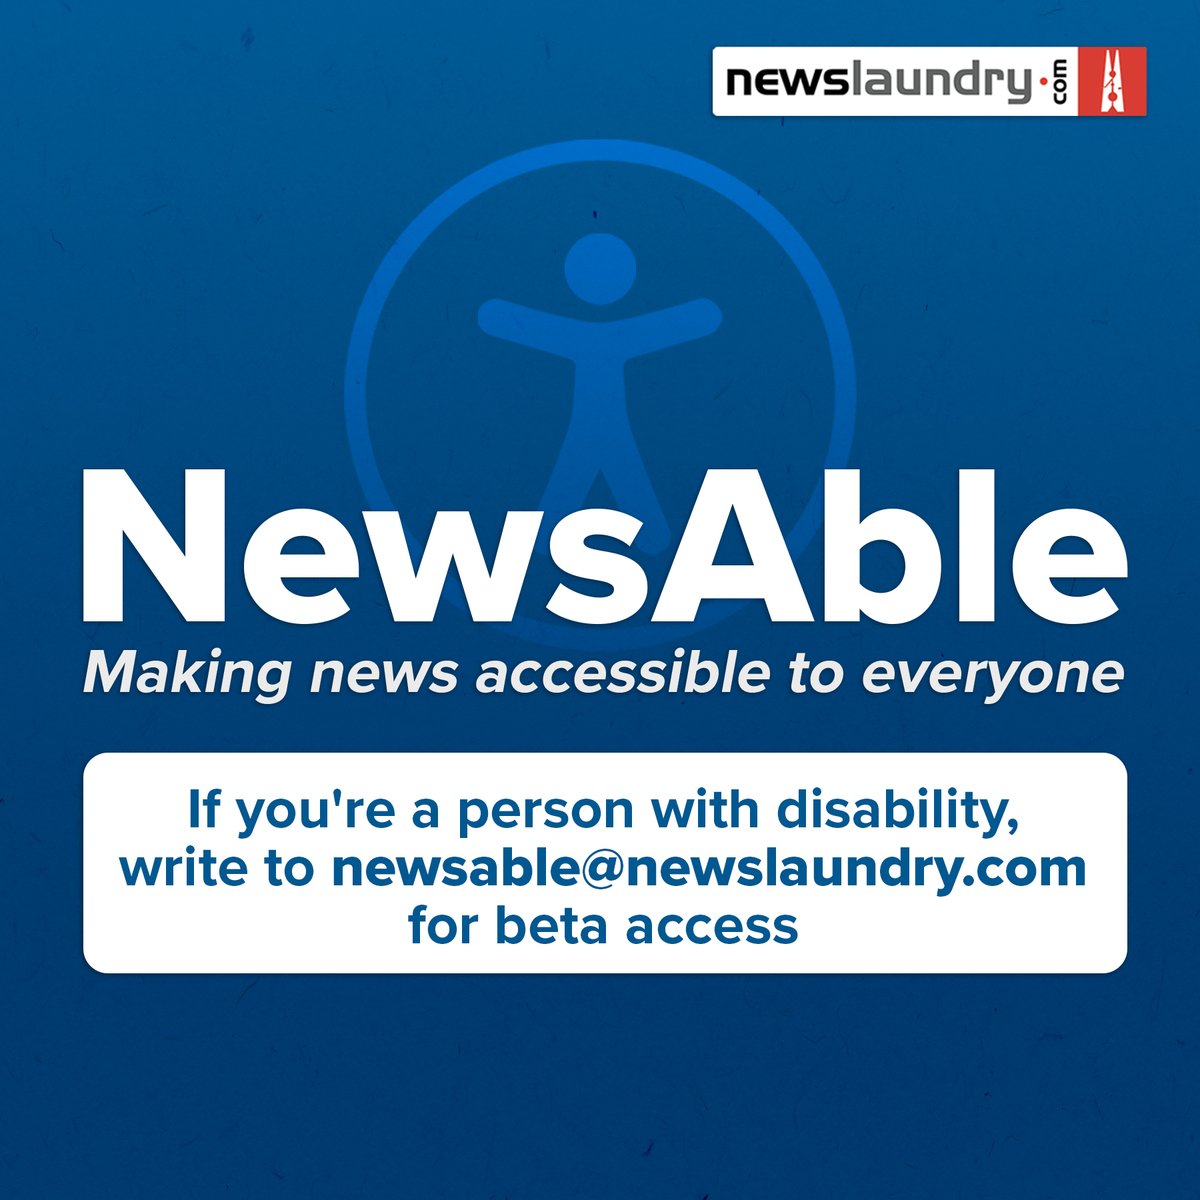 We're looking for interns to help us test and improve our accessible app. If you're a disabled person and would like to work with @newslaundry, 📧newsable@newslaundry.com. Paid internship for a month. Today's #WorldDisabilityDay so couldn't be a better day to amplify this.